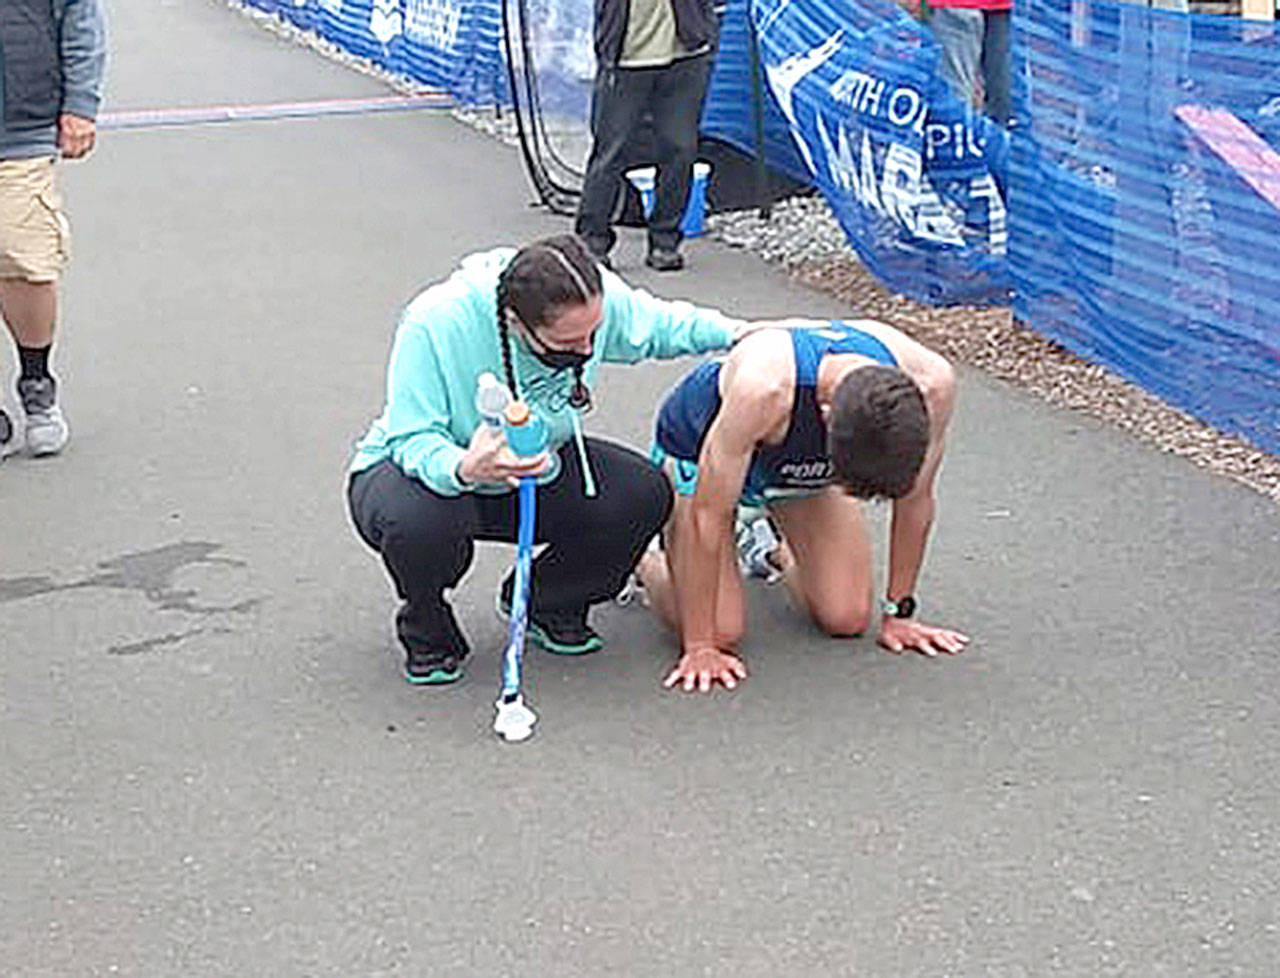 Adam Klein of Tualatin, Ore., collapses after winning the North Olympic Discovery Marathon and is helped by marathon volunteer Kaitlin Alderson. (Pierre LaBossiere/Peninsula Daily News)